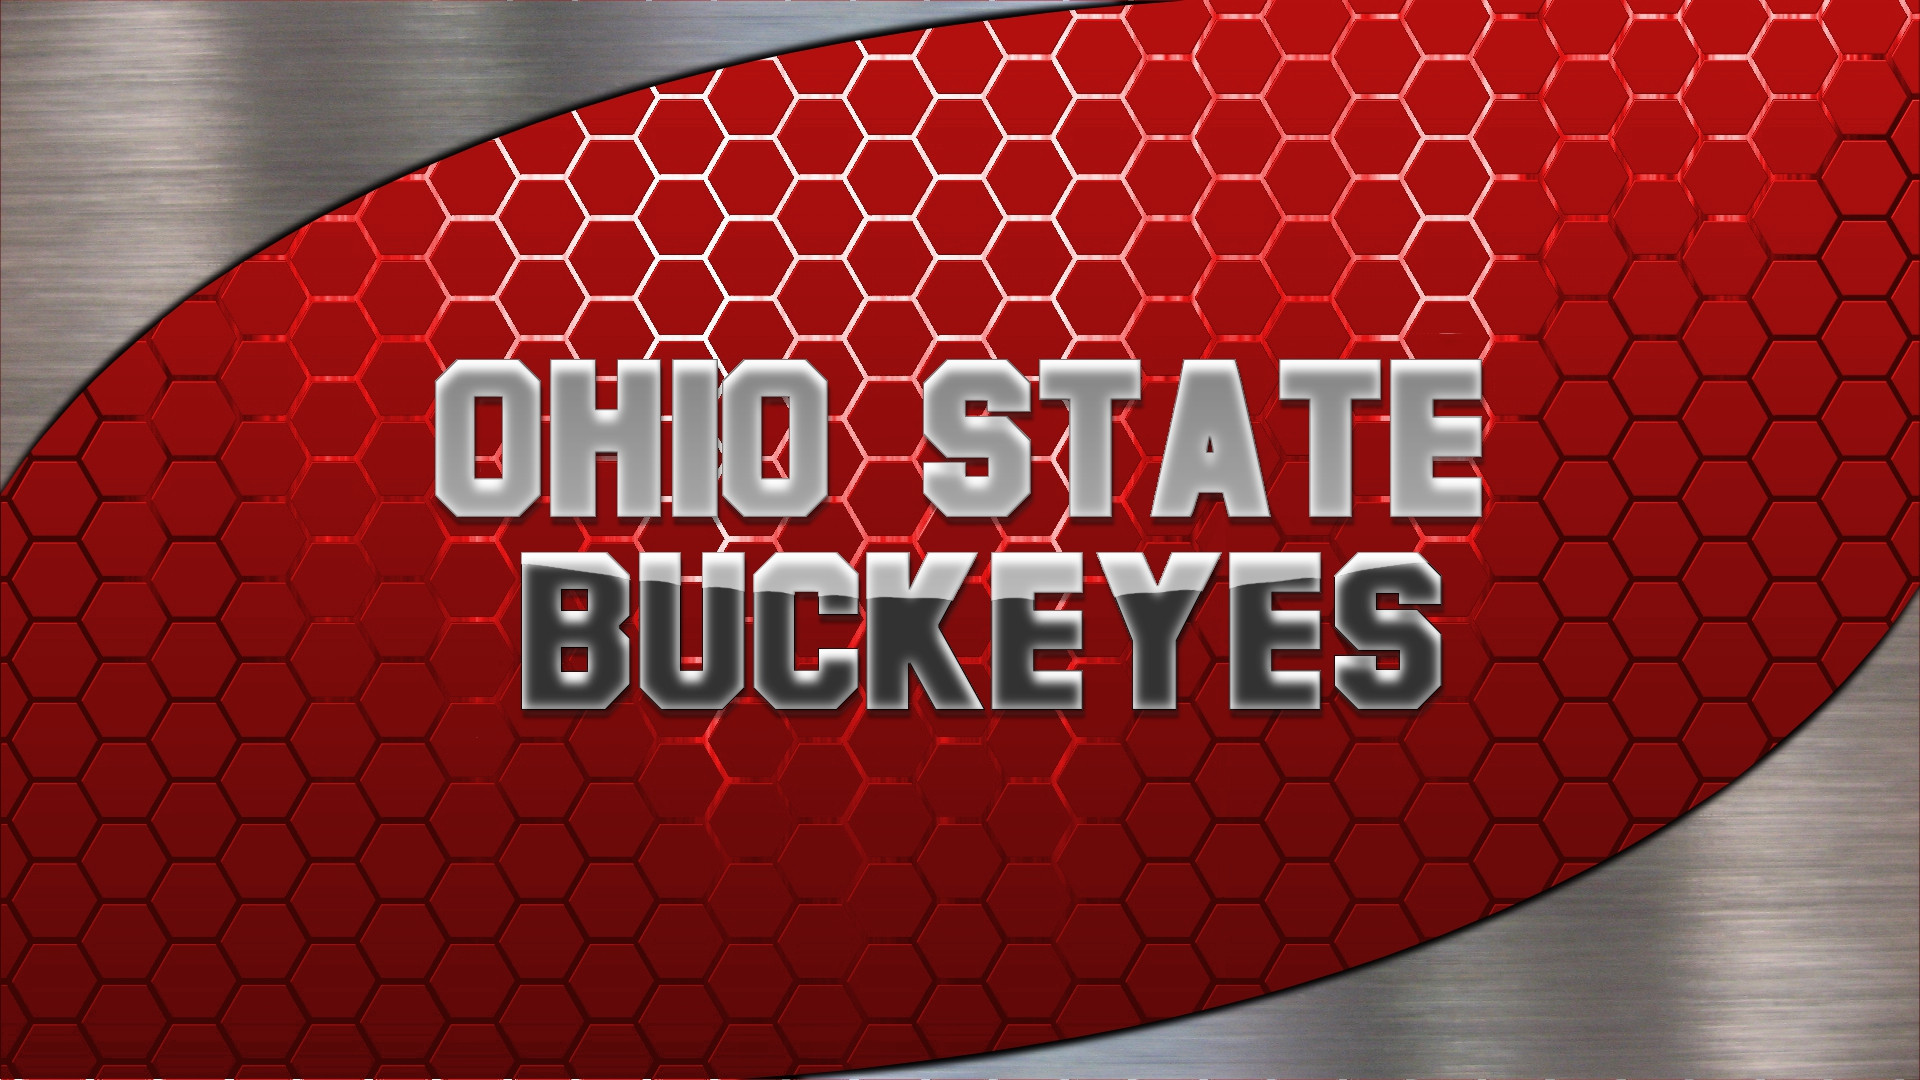 Ohio State Buckeyes Wallpapers | Wallpapers, Backgrounds, Images ...